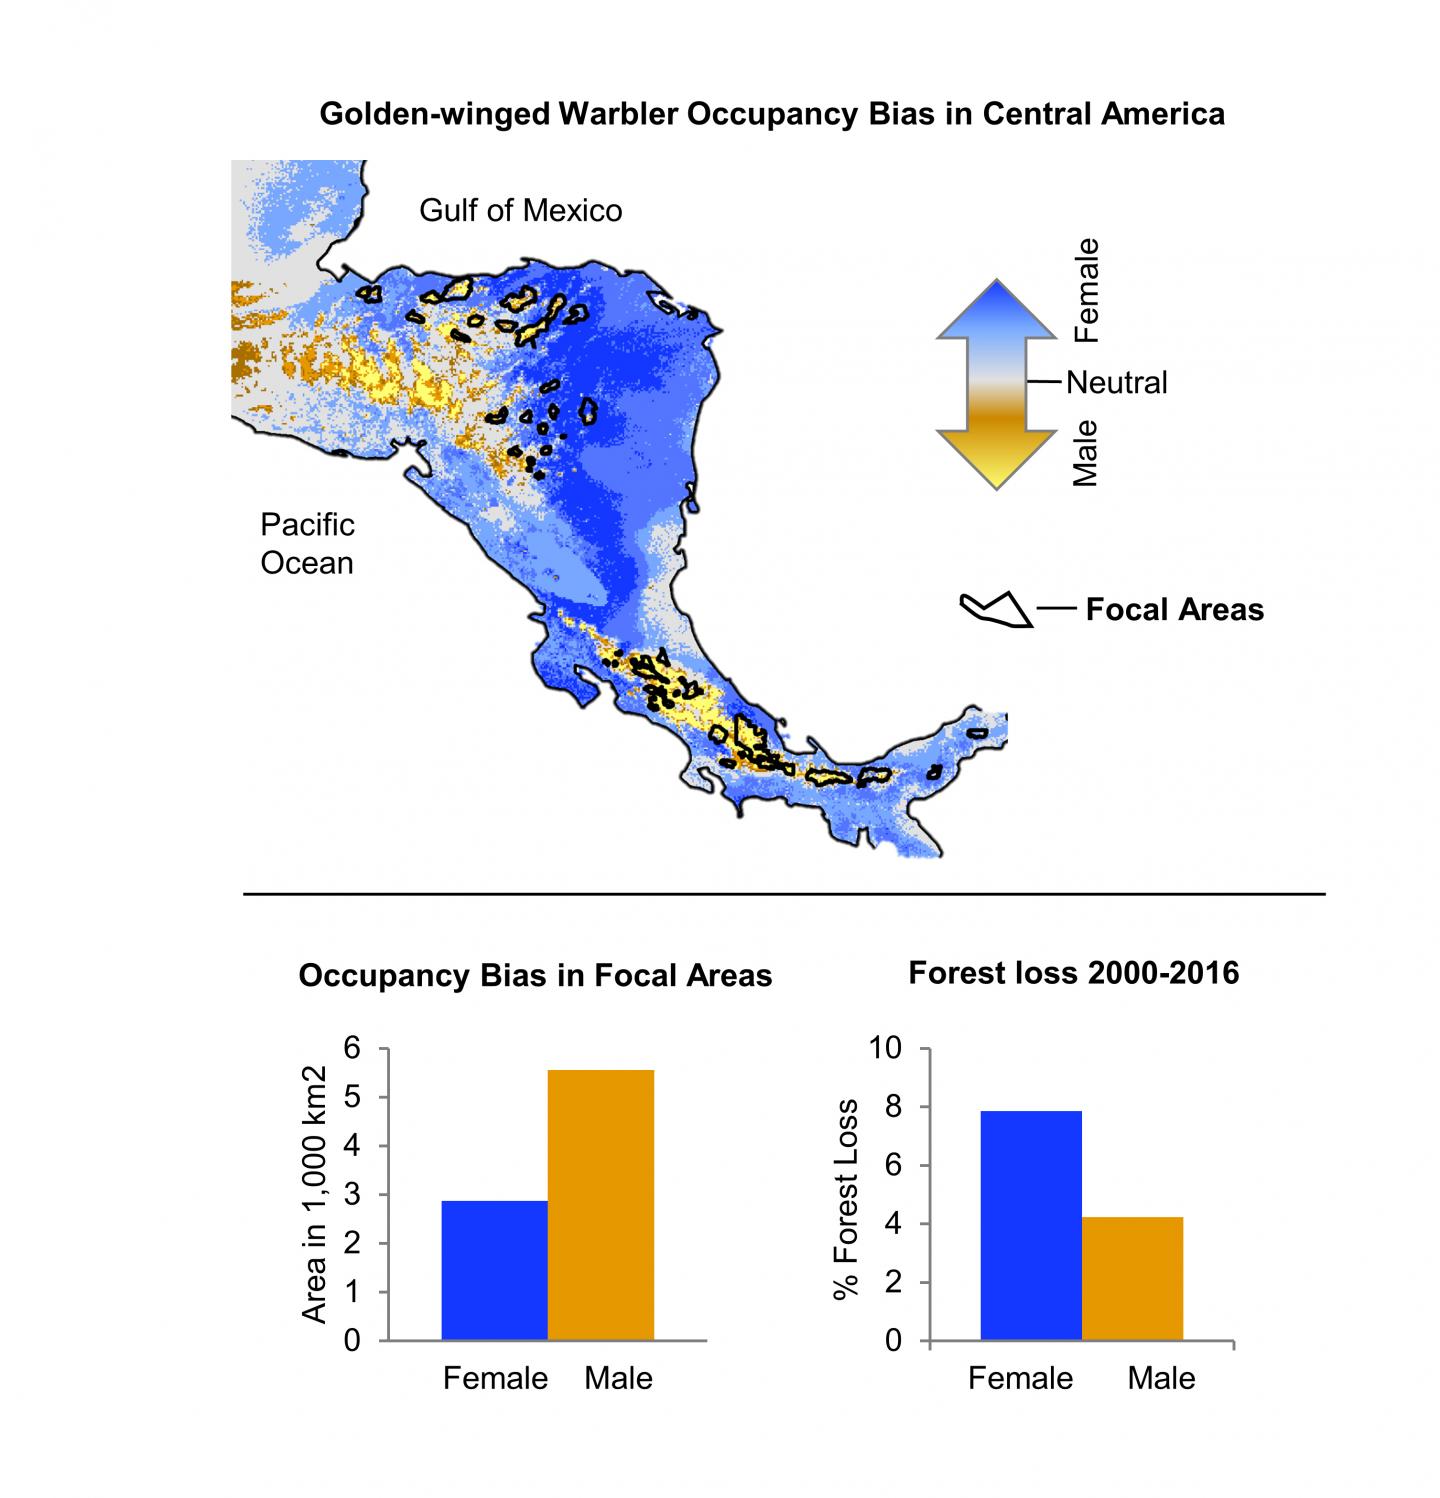 Golden-winged Warbler Occupancy Bias in Central America